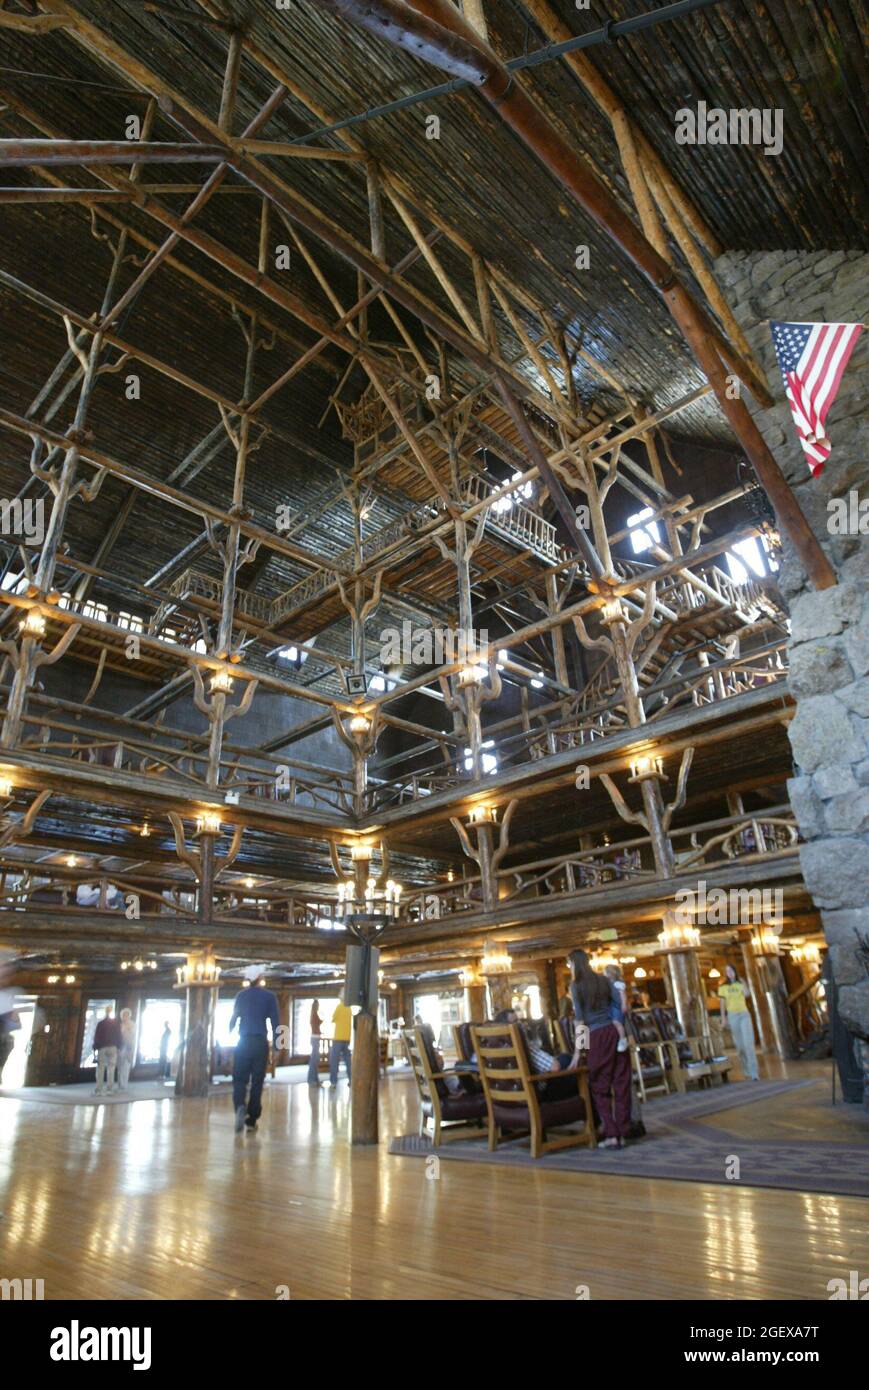 https://c8.alamy.com/comp/2GEXA7T/interior-of-old-faithful-inn-wide-angle-view-date-unknown-2GEXA7T.jpg